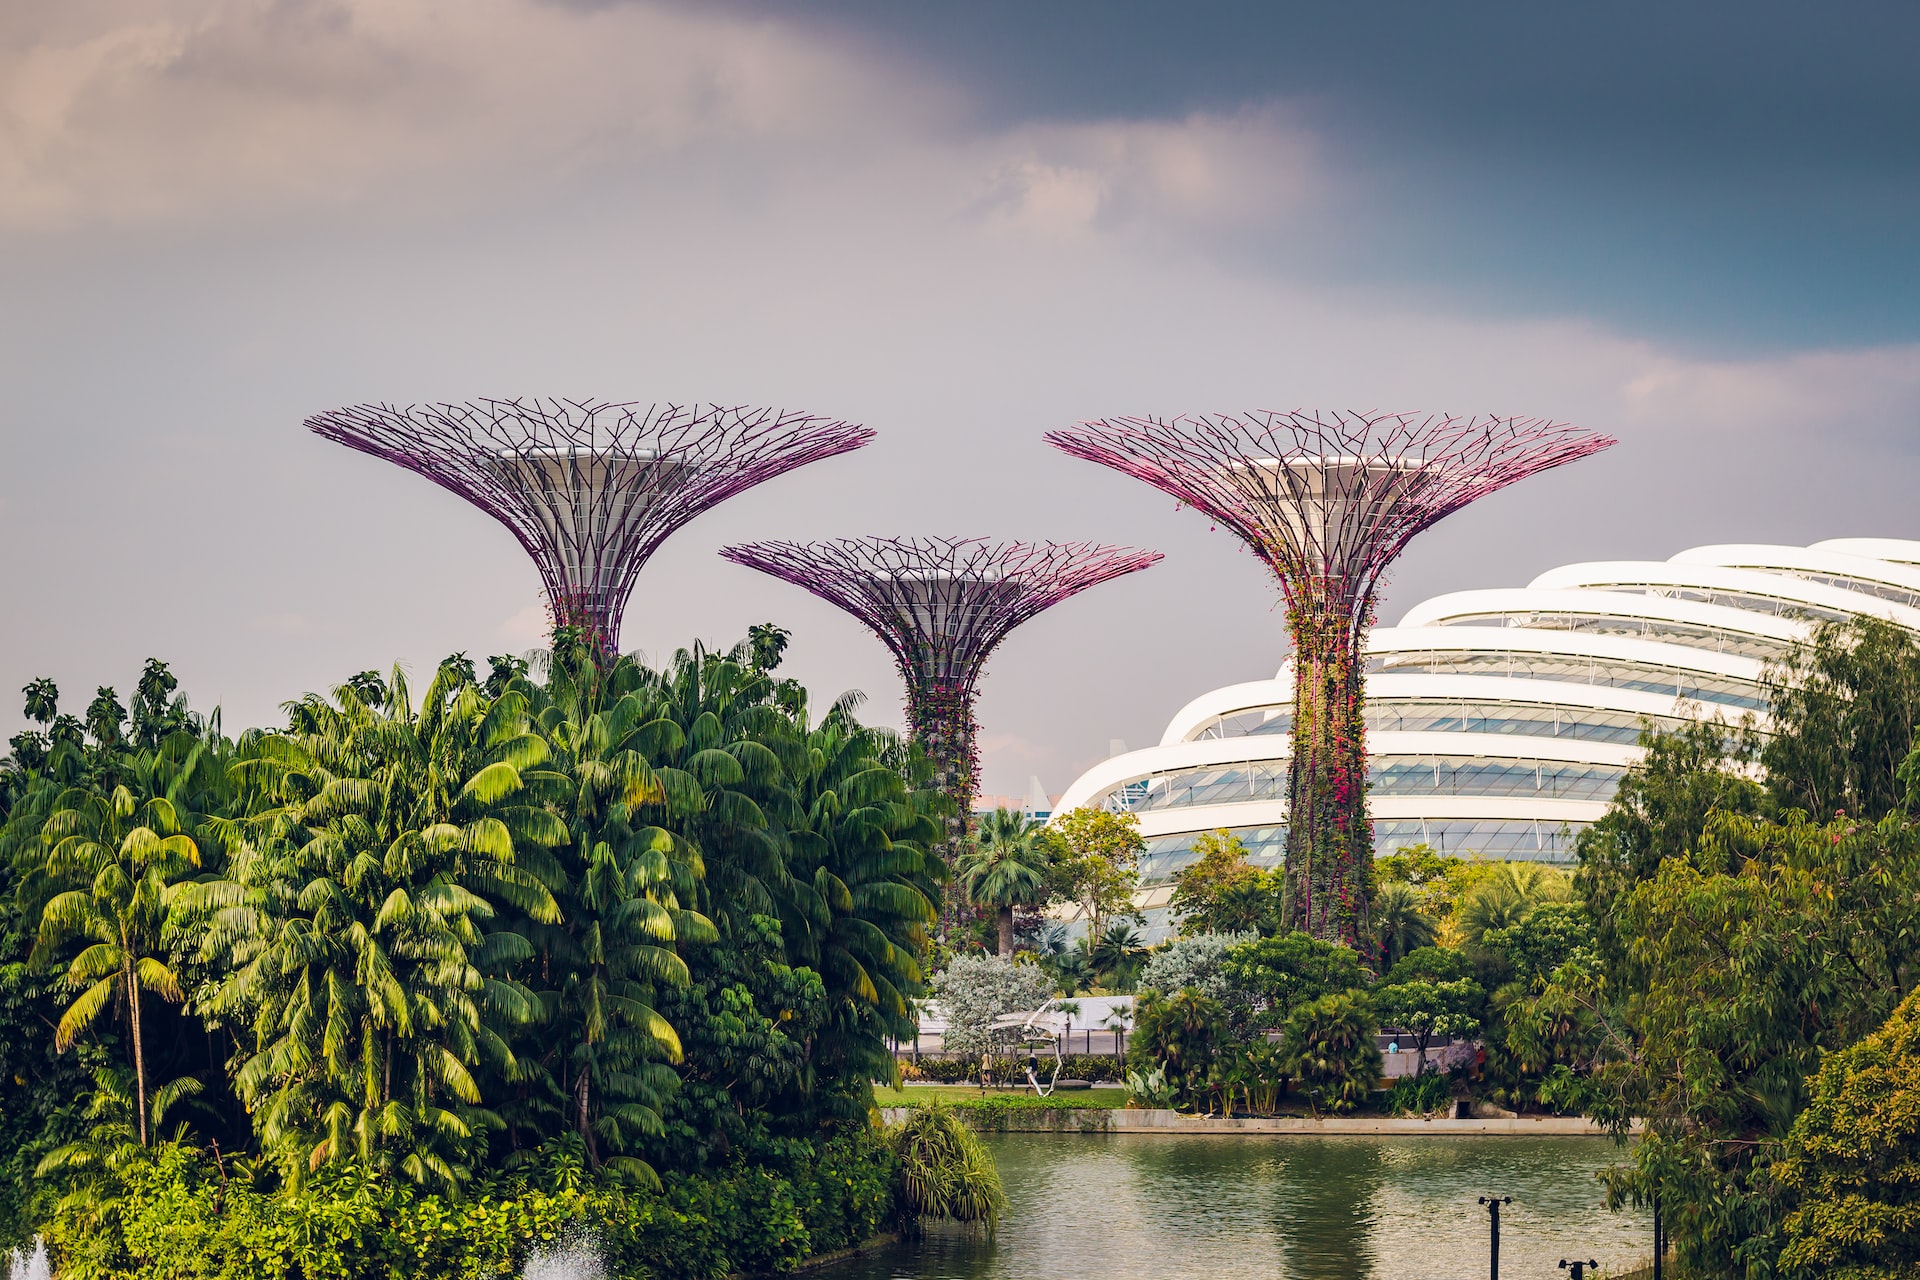 An image of the Singapore Gardens by the Bay, with three towering metal structures, designed to look like trees.